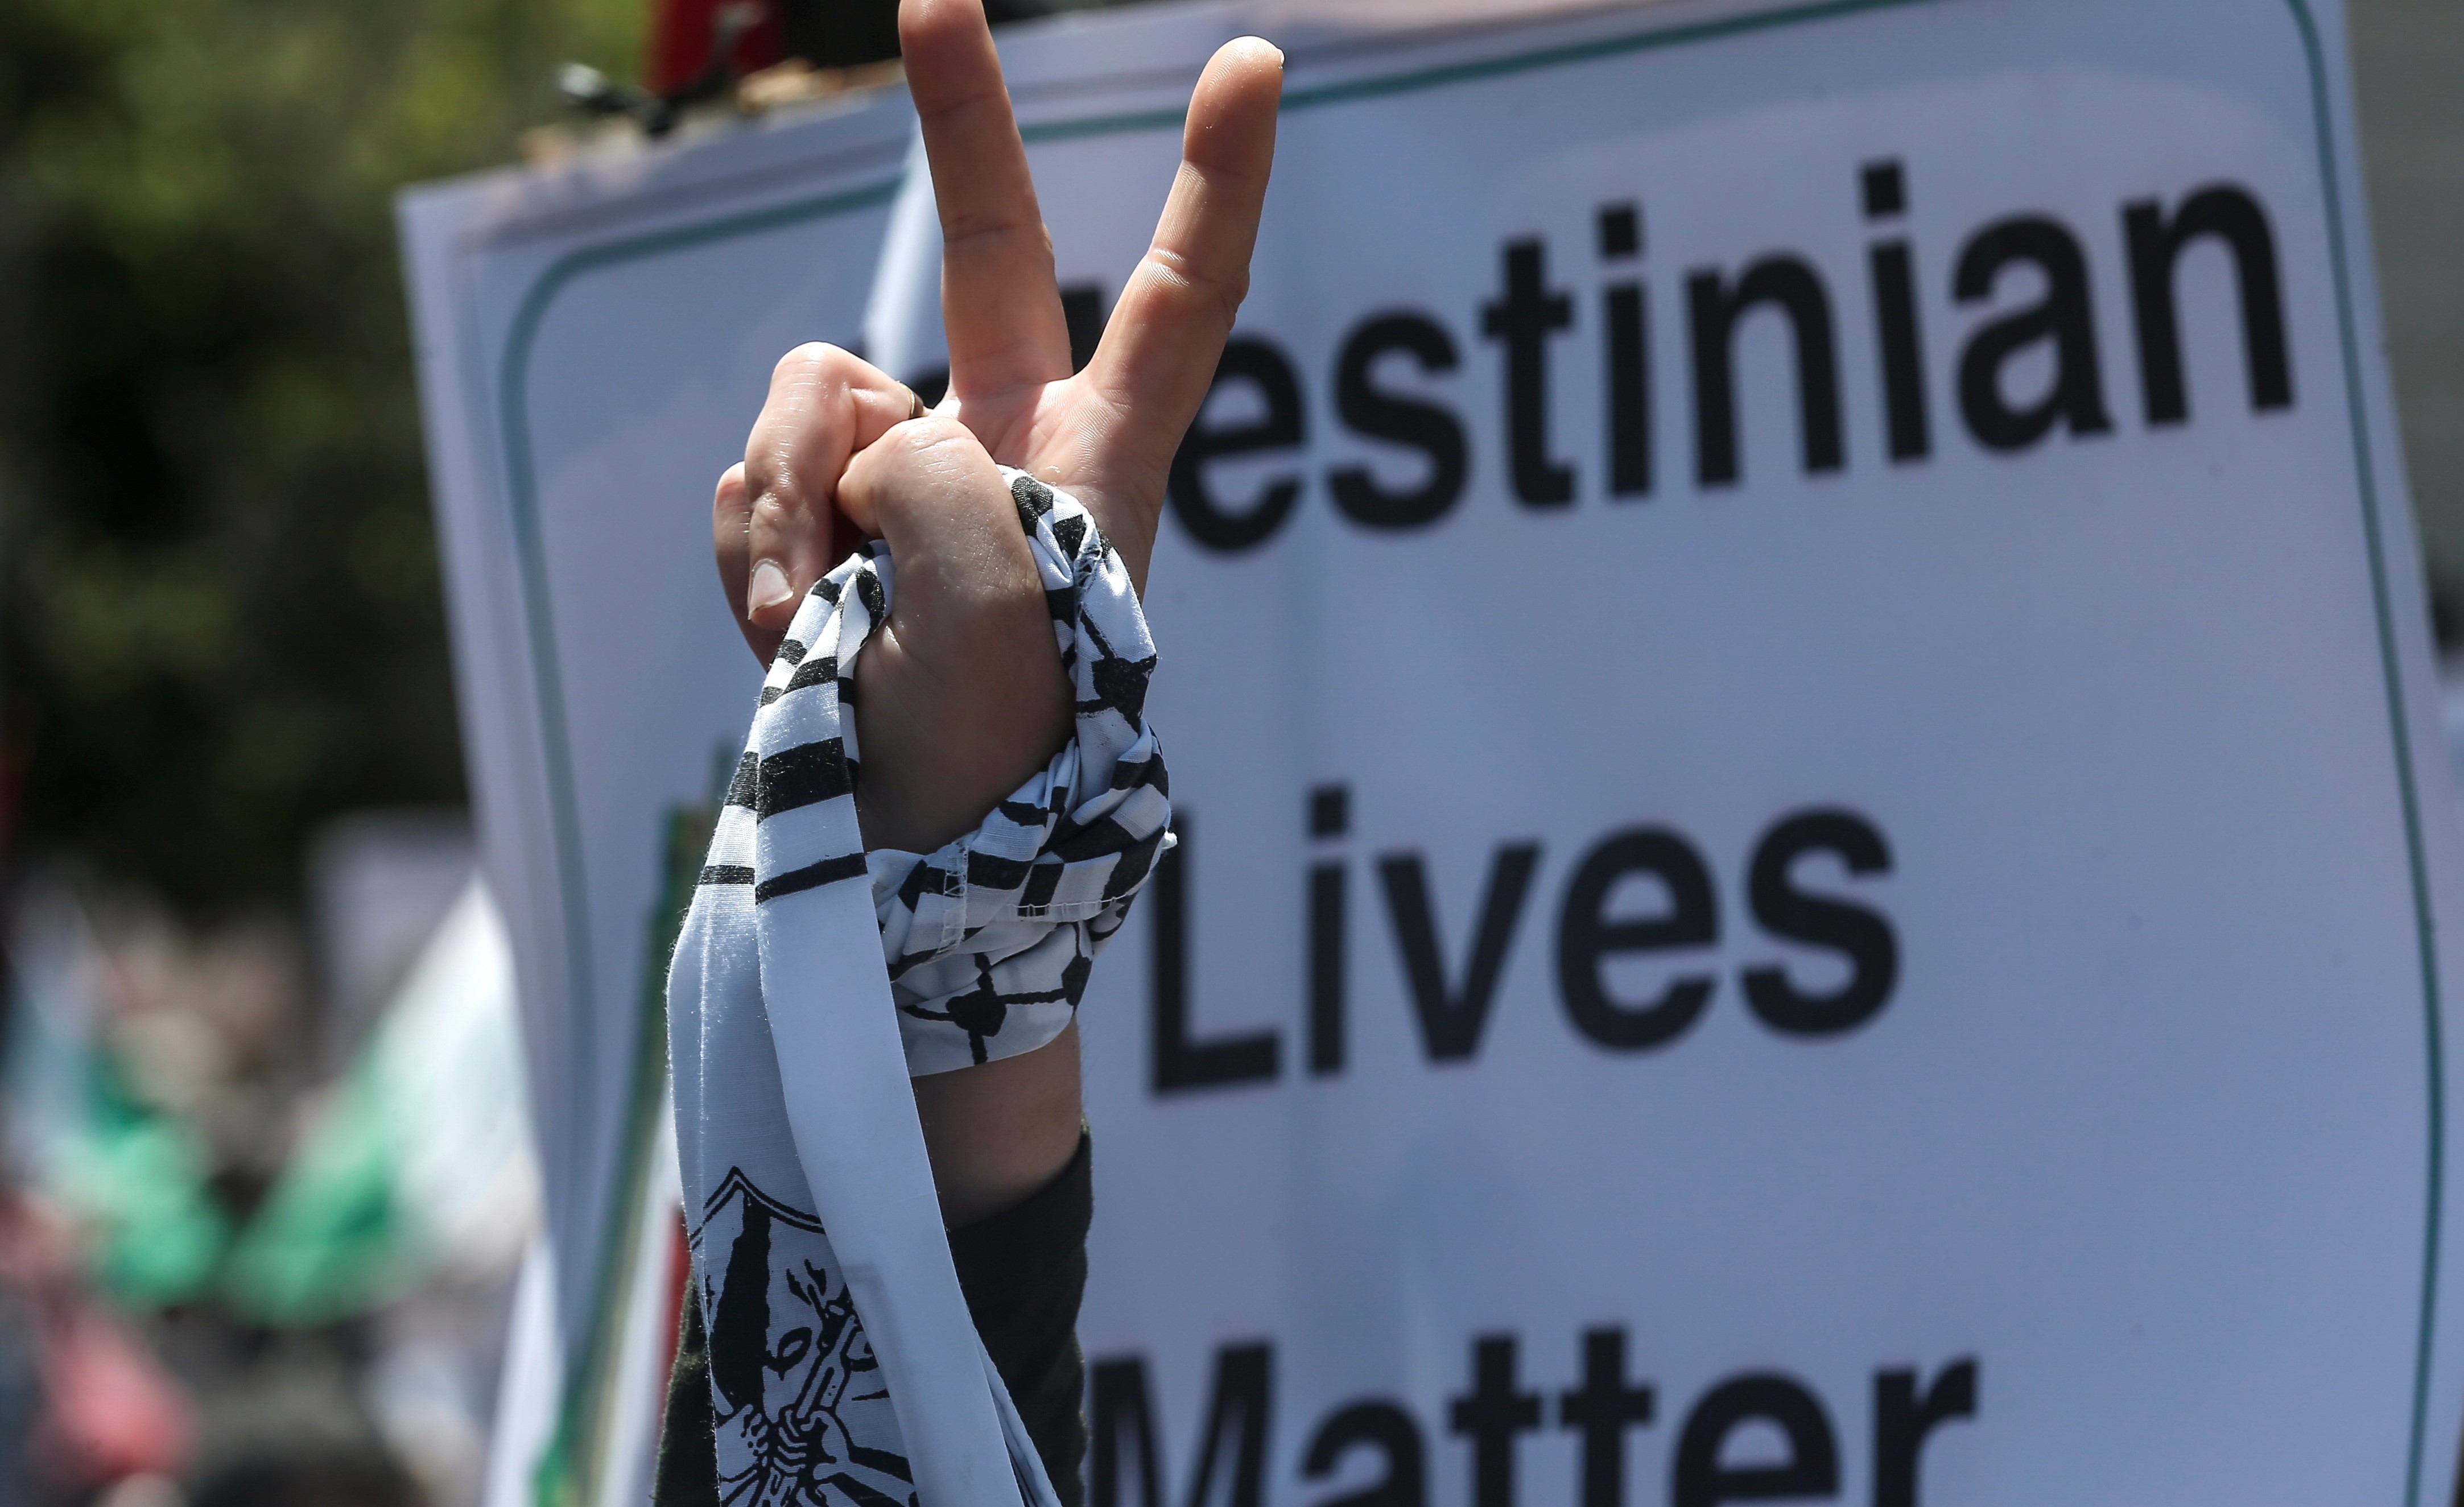 A Palestinian demonstrator flashes the victory sign during a rally as Palestinians call for a "Day of Rage" to protest Israel's plan to annex parts of the occupied West Bank, in Gaza City on July 1, 2020. 